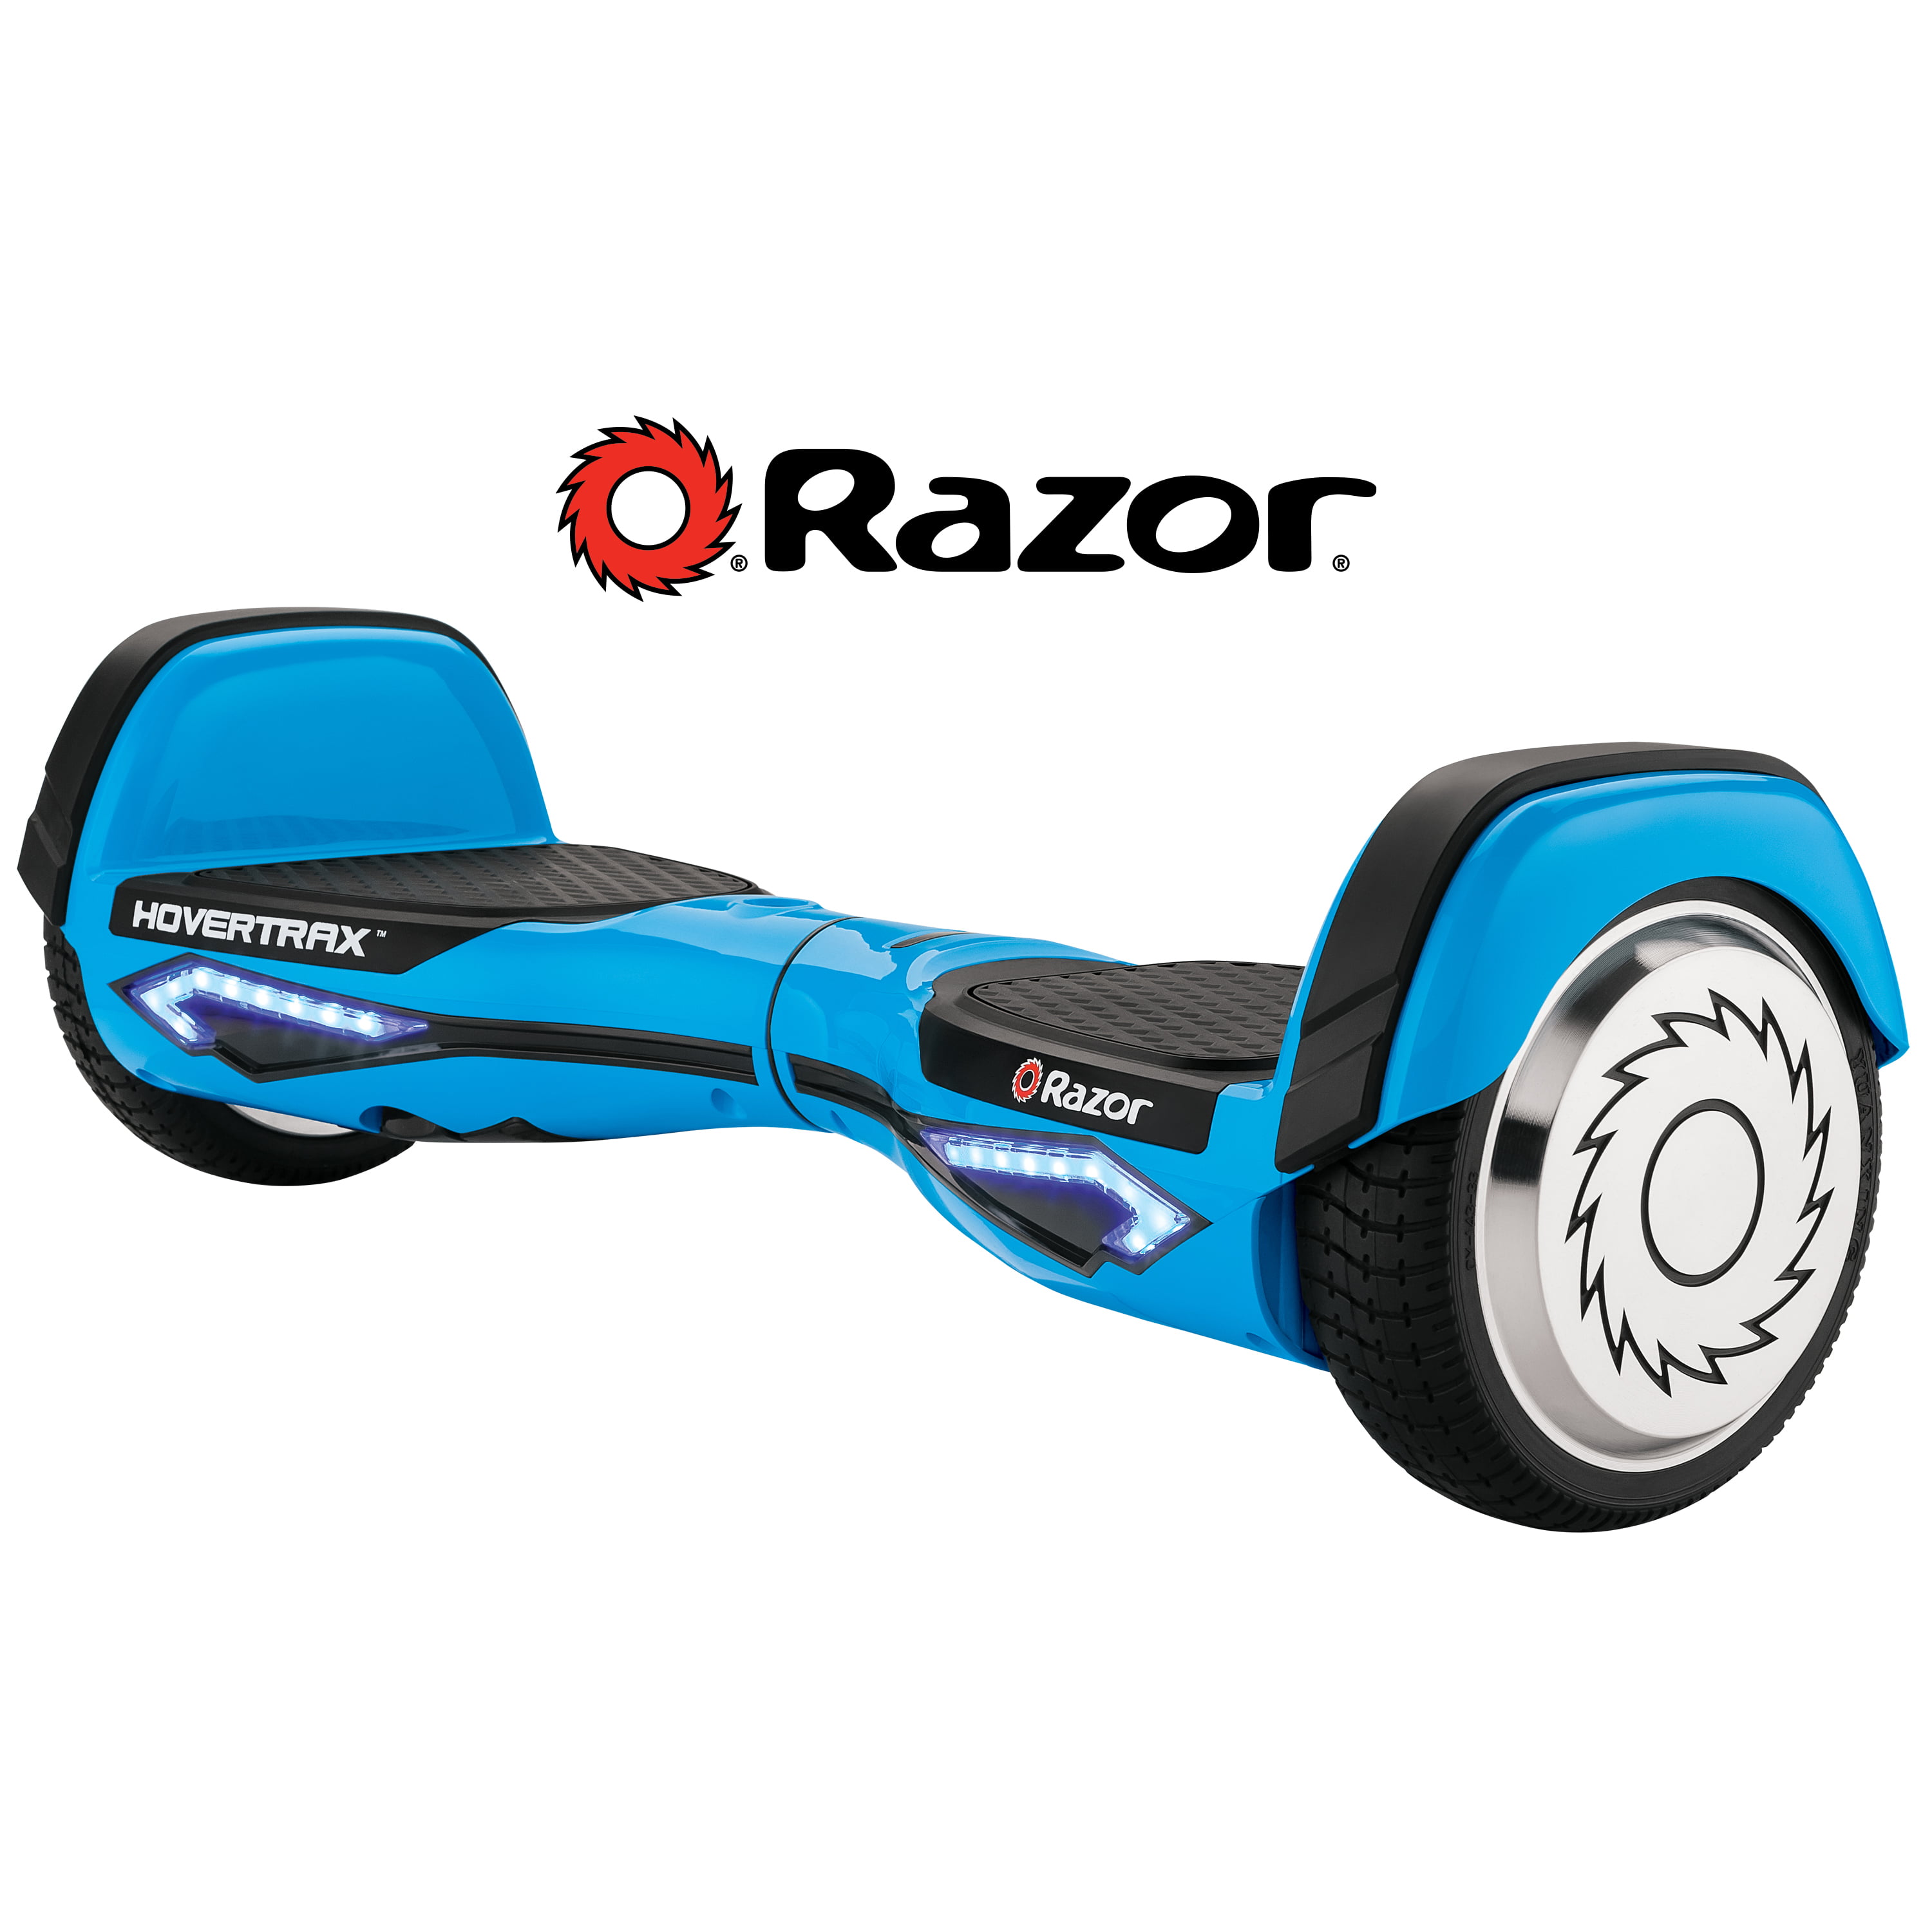 hoverboard scooter